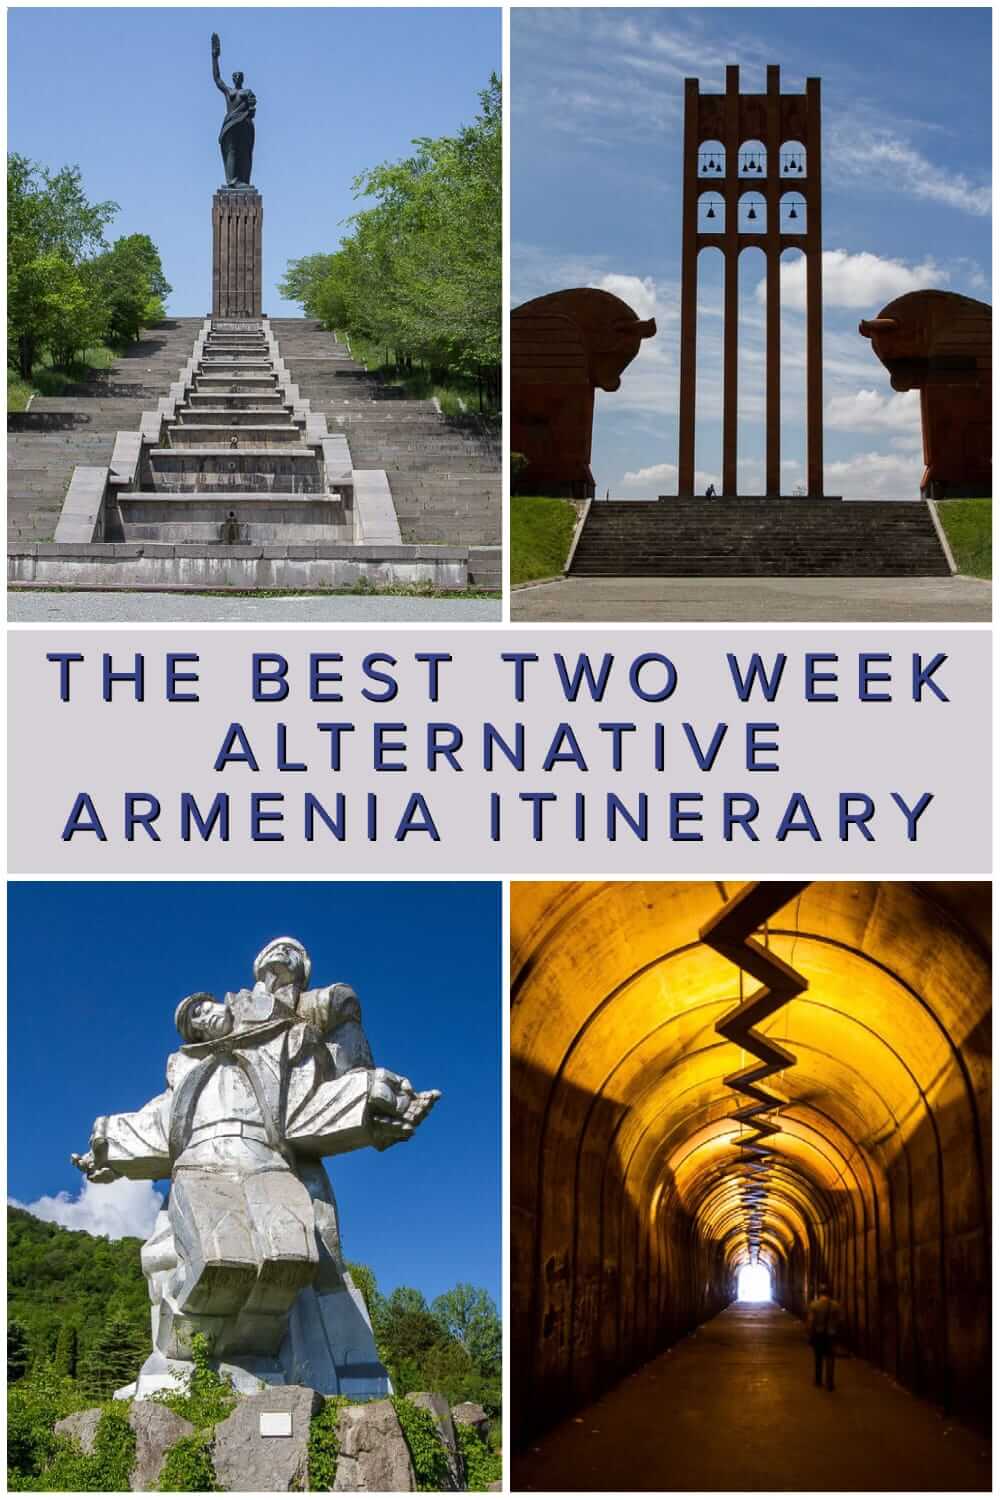 Armenia Itinerary – What to see in Armenia in 2 weeks #alternative #travel #backpacking #Caucasus #travelplanning